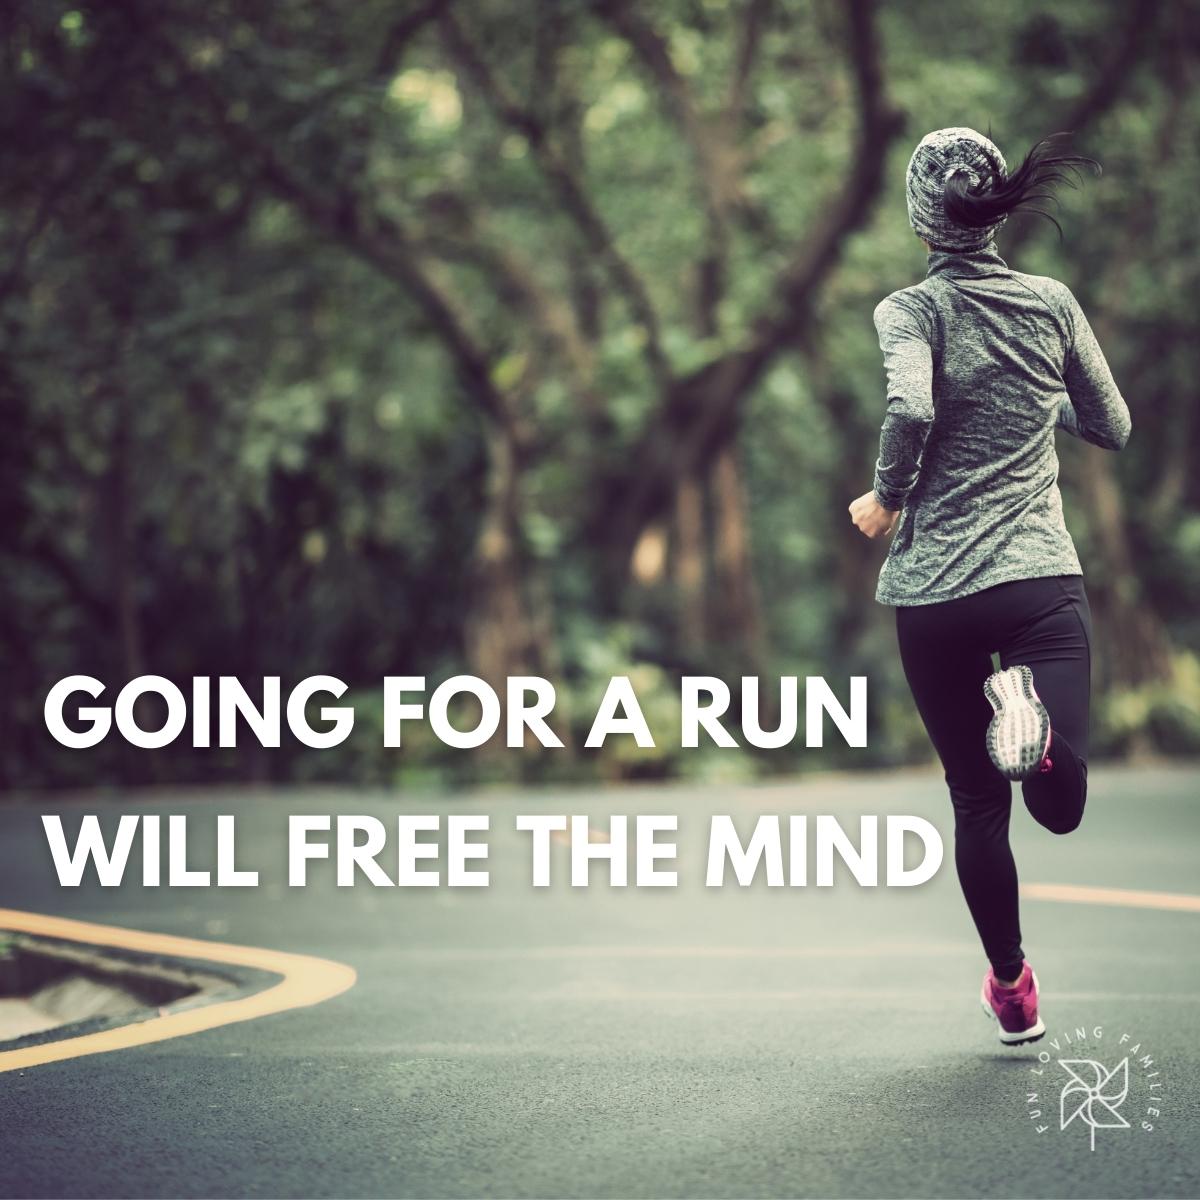 Going for a run will free the mind affirmation